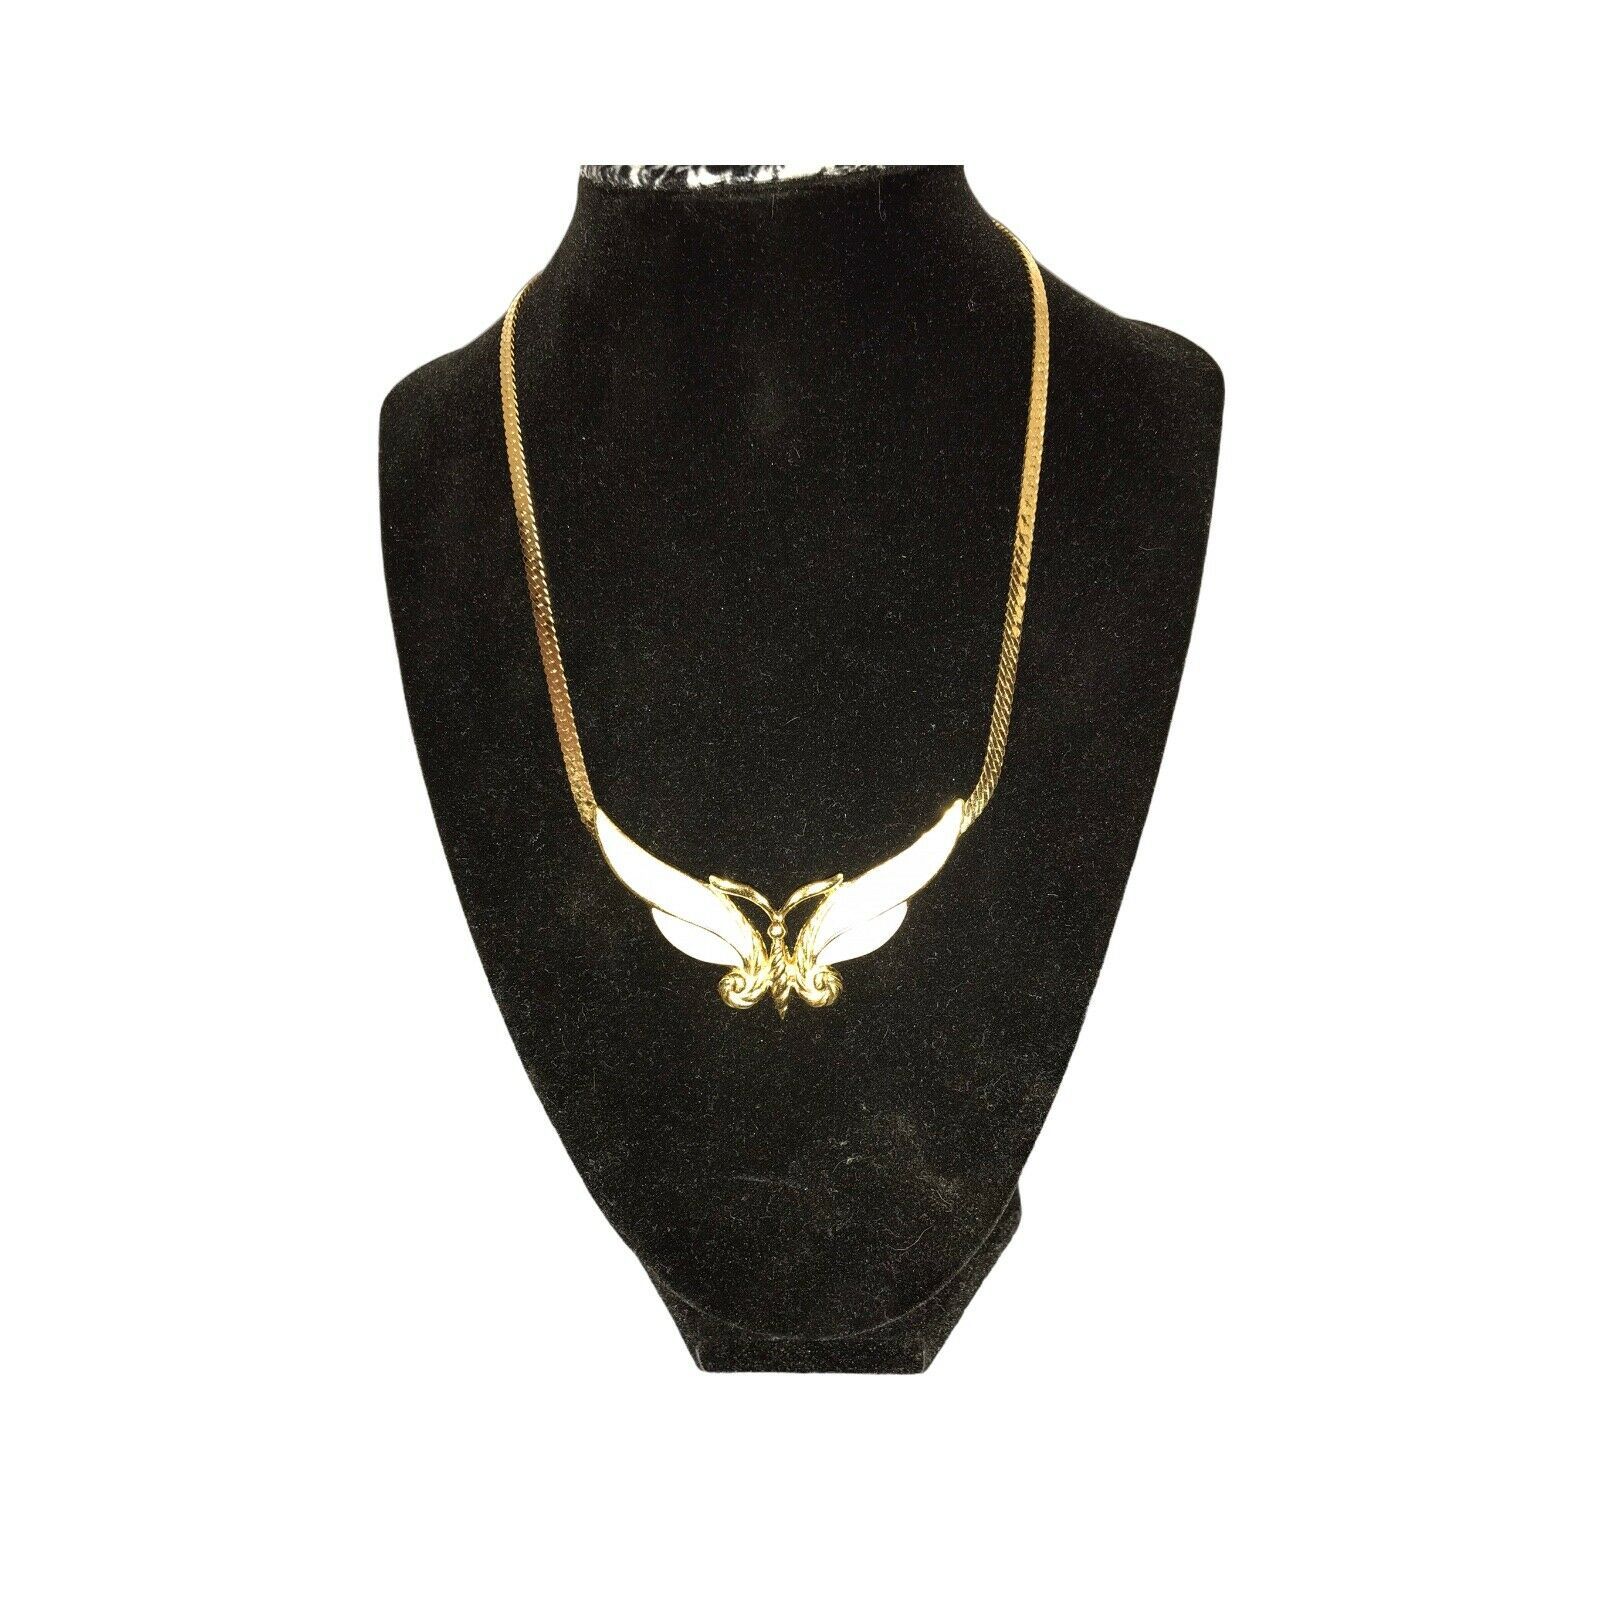 Primary image for Vintage TRIFARI With Bird Necklace 